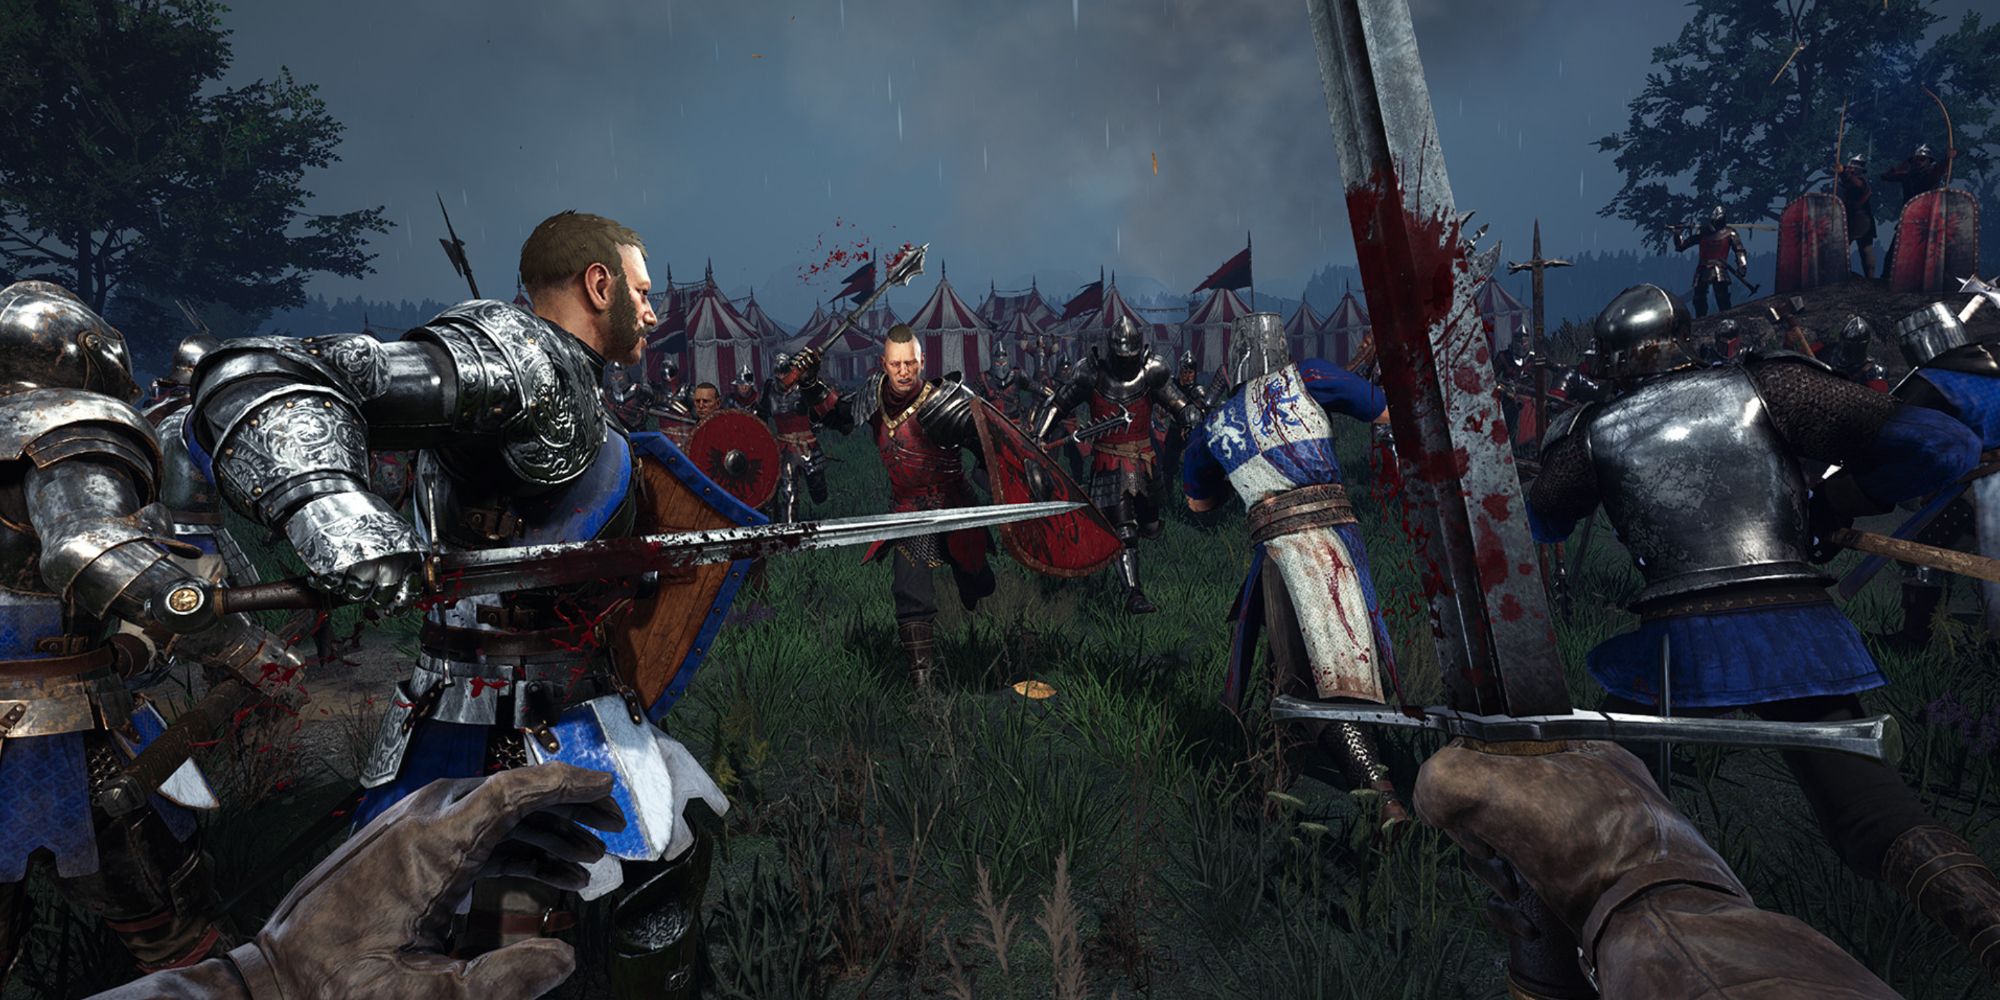 Agatha fighting against Mason Order in The Battle of Wardenglade map in Chivalry 2